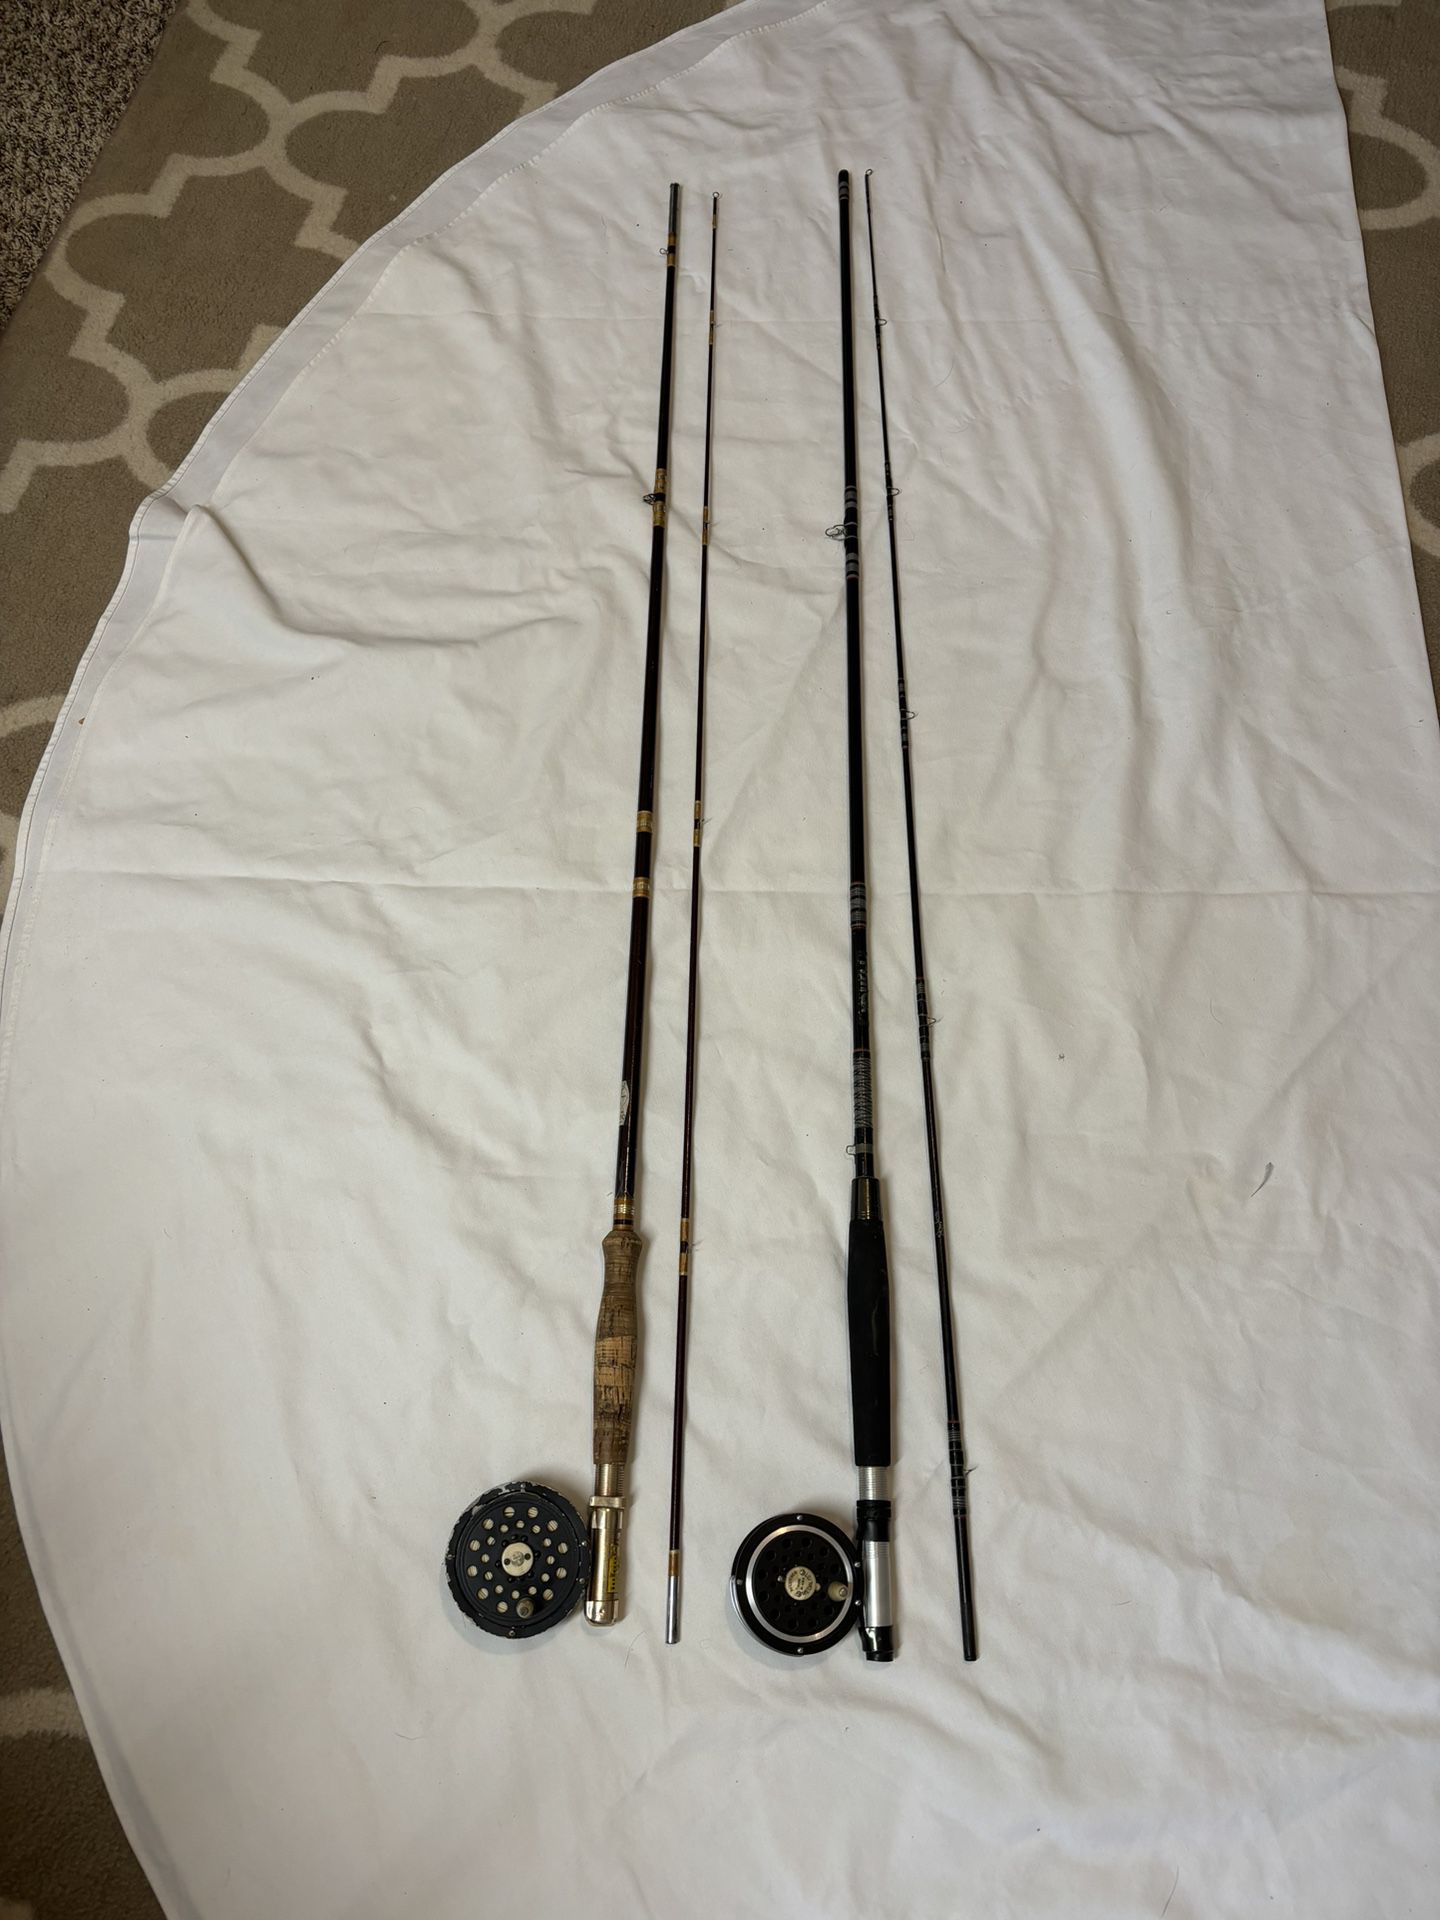 2 8’ Fly Rods